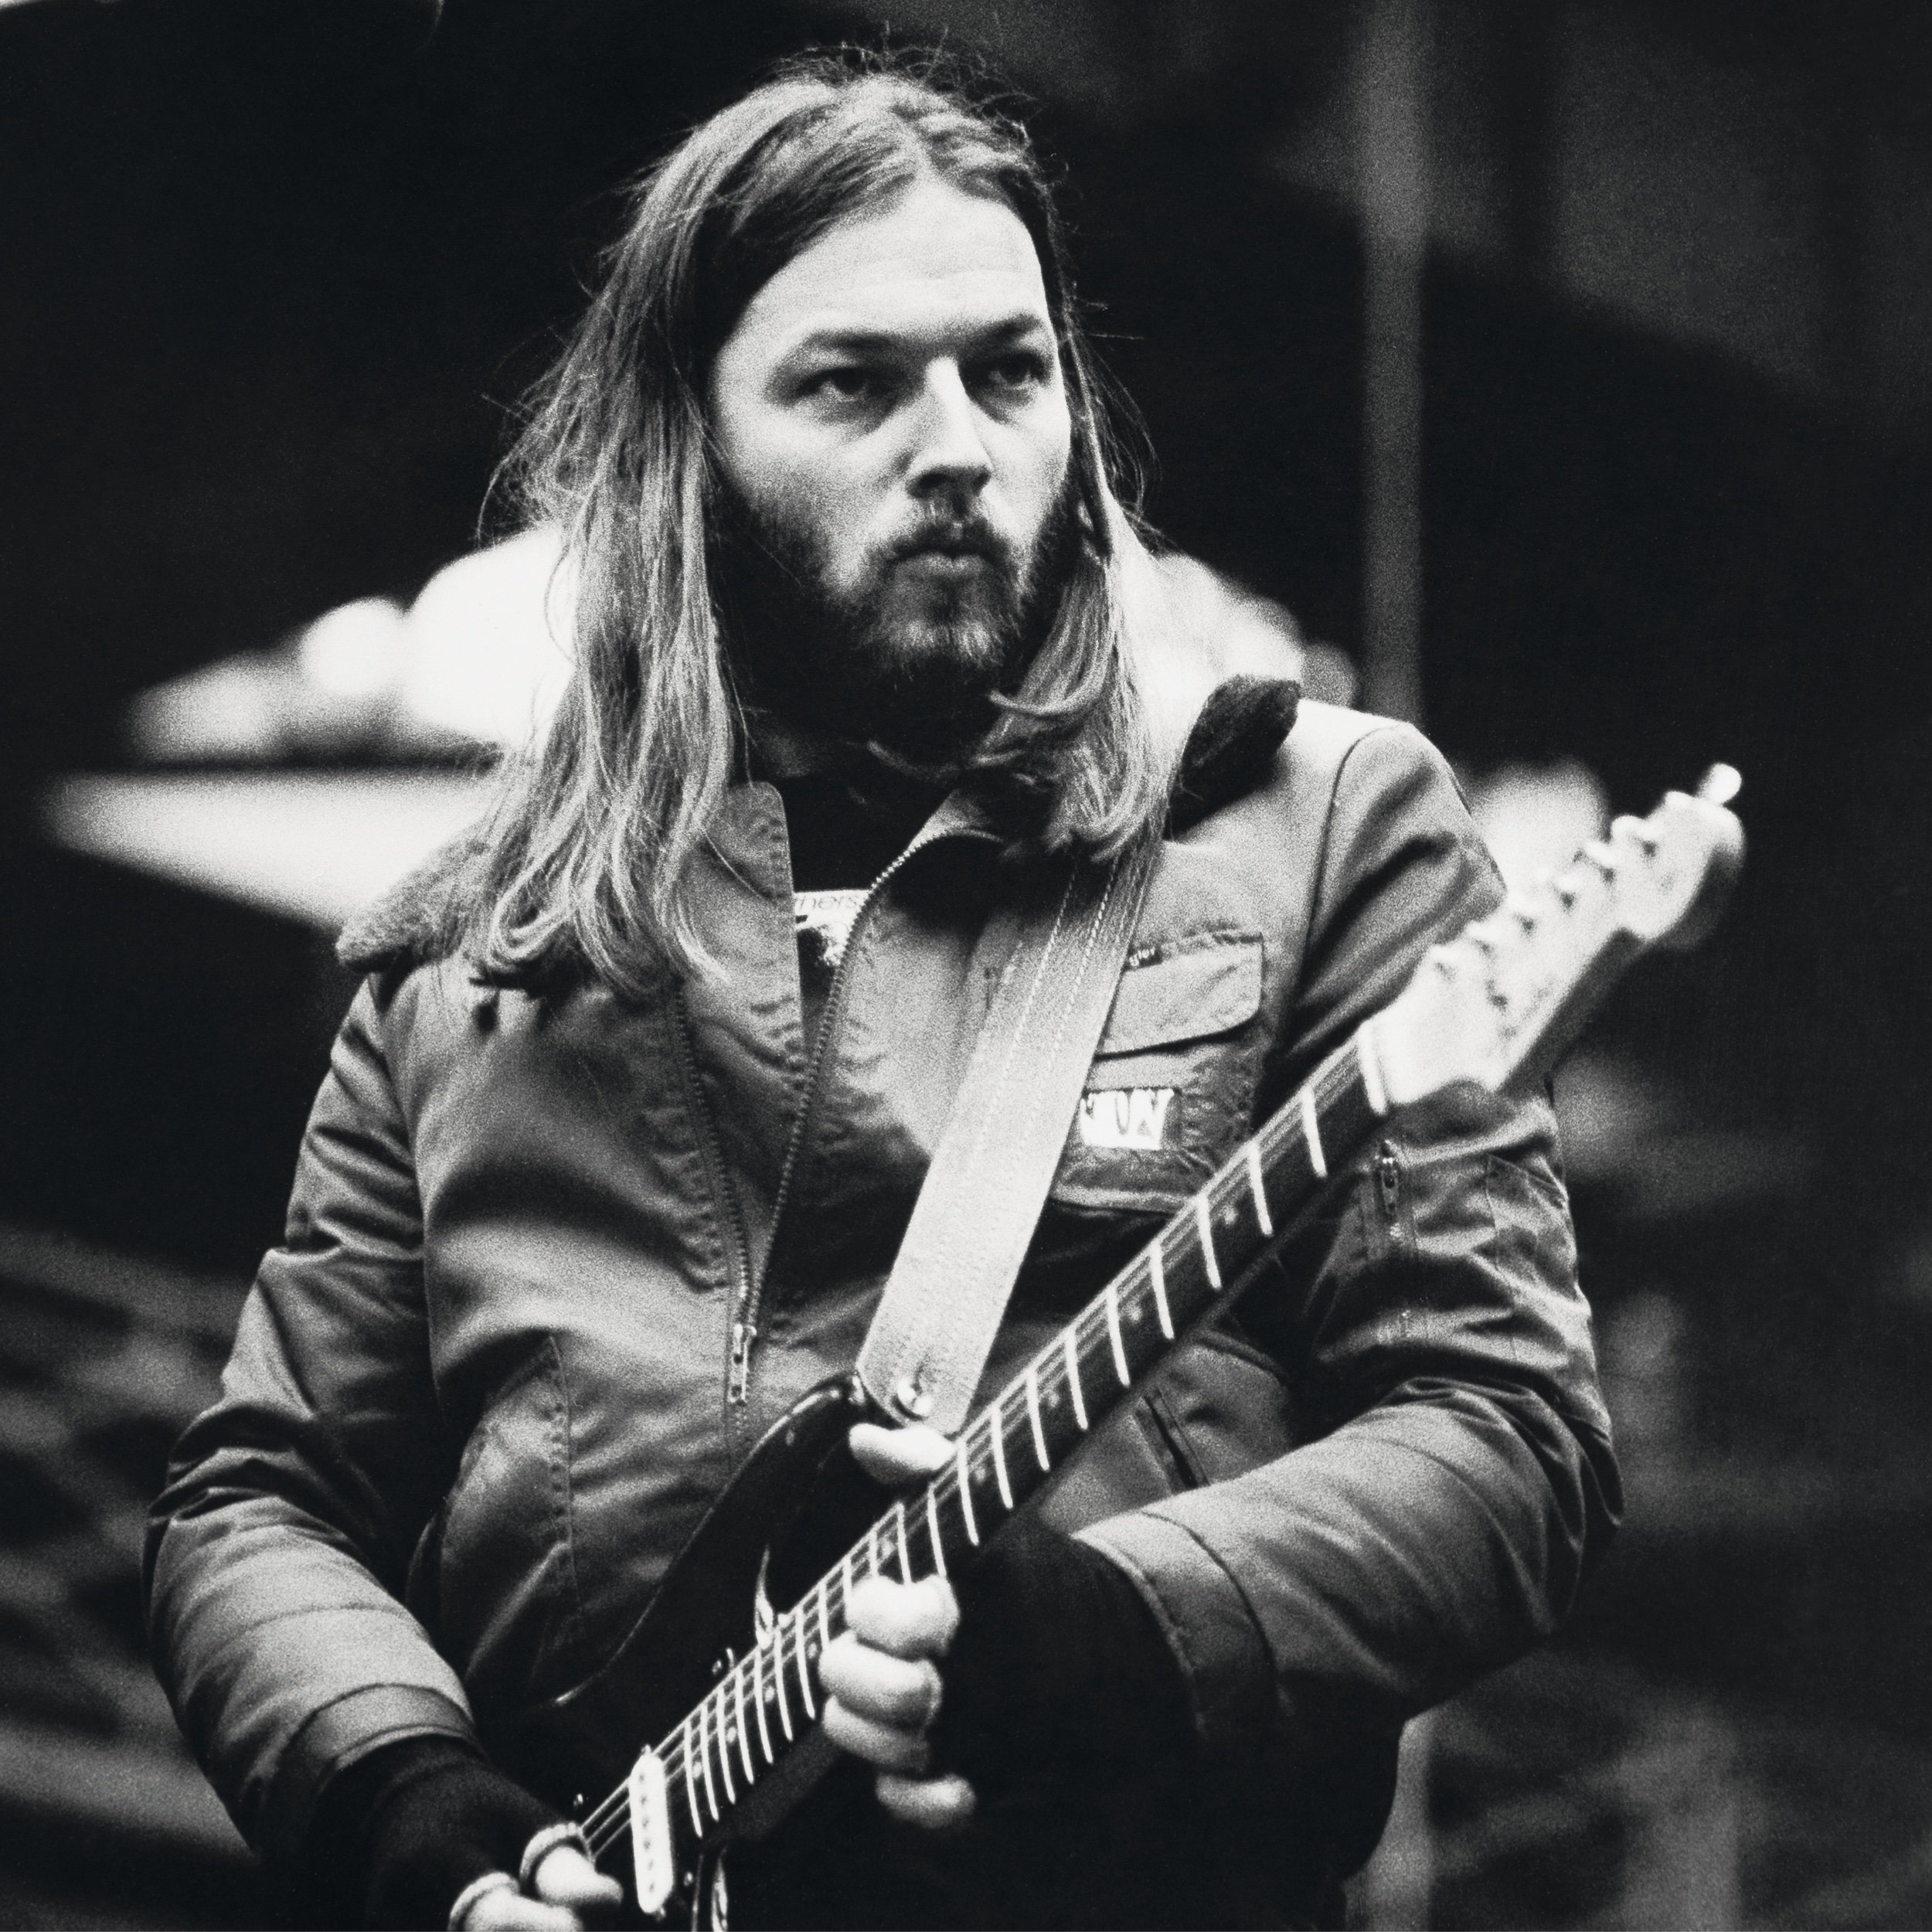 david gilmour - tour rehearsals at olympia london 1977 by aubrey powell (c) pink floyd music ltd.jpeg